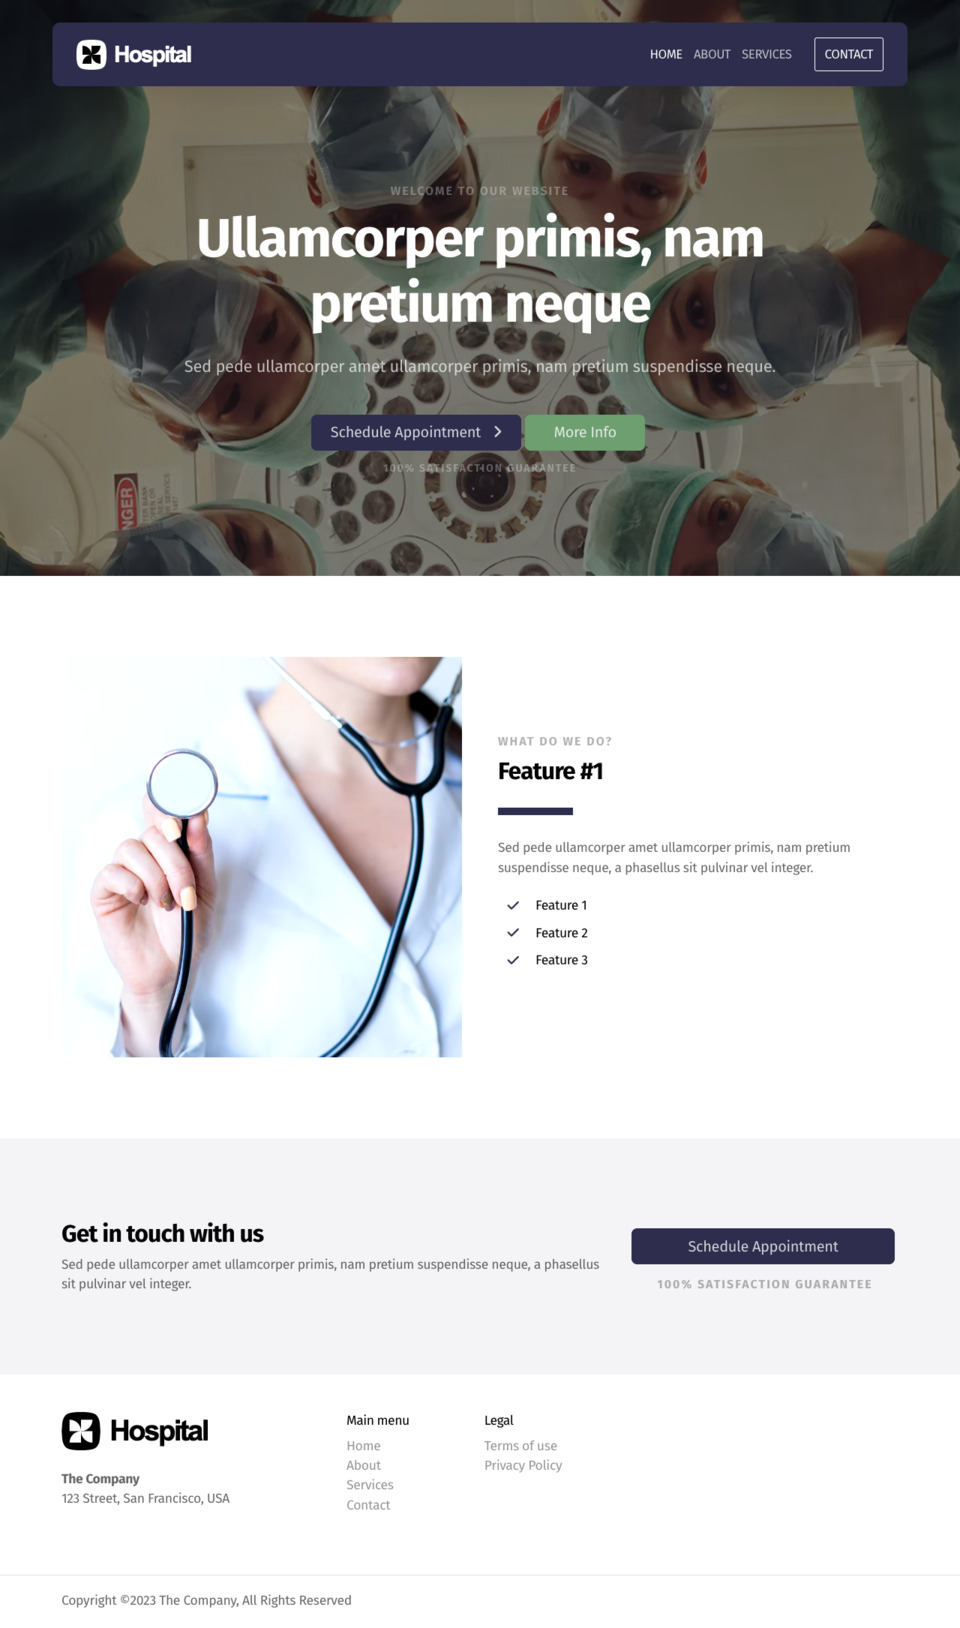 Hospital Website Template - Perfect for hospitals, medical centers, labs, clinics, and any healthcare-related business.